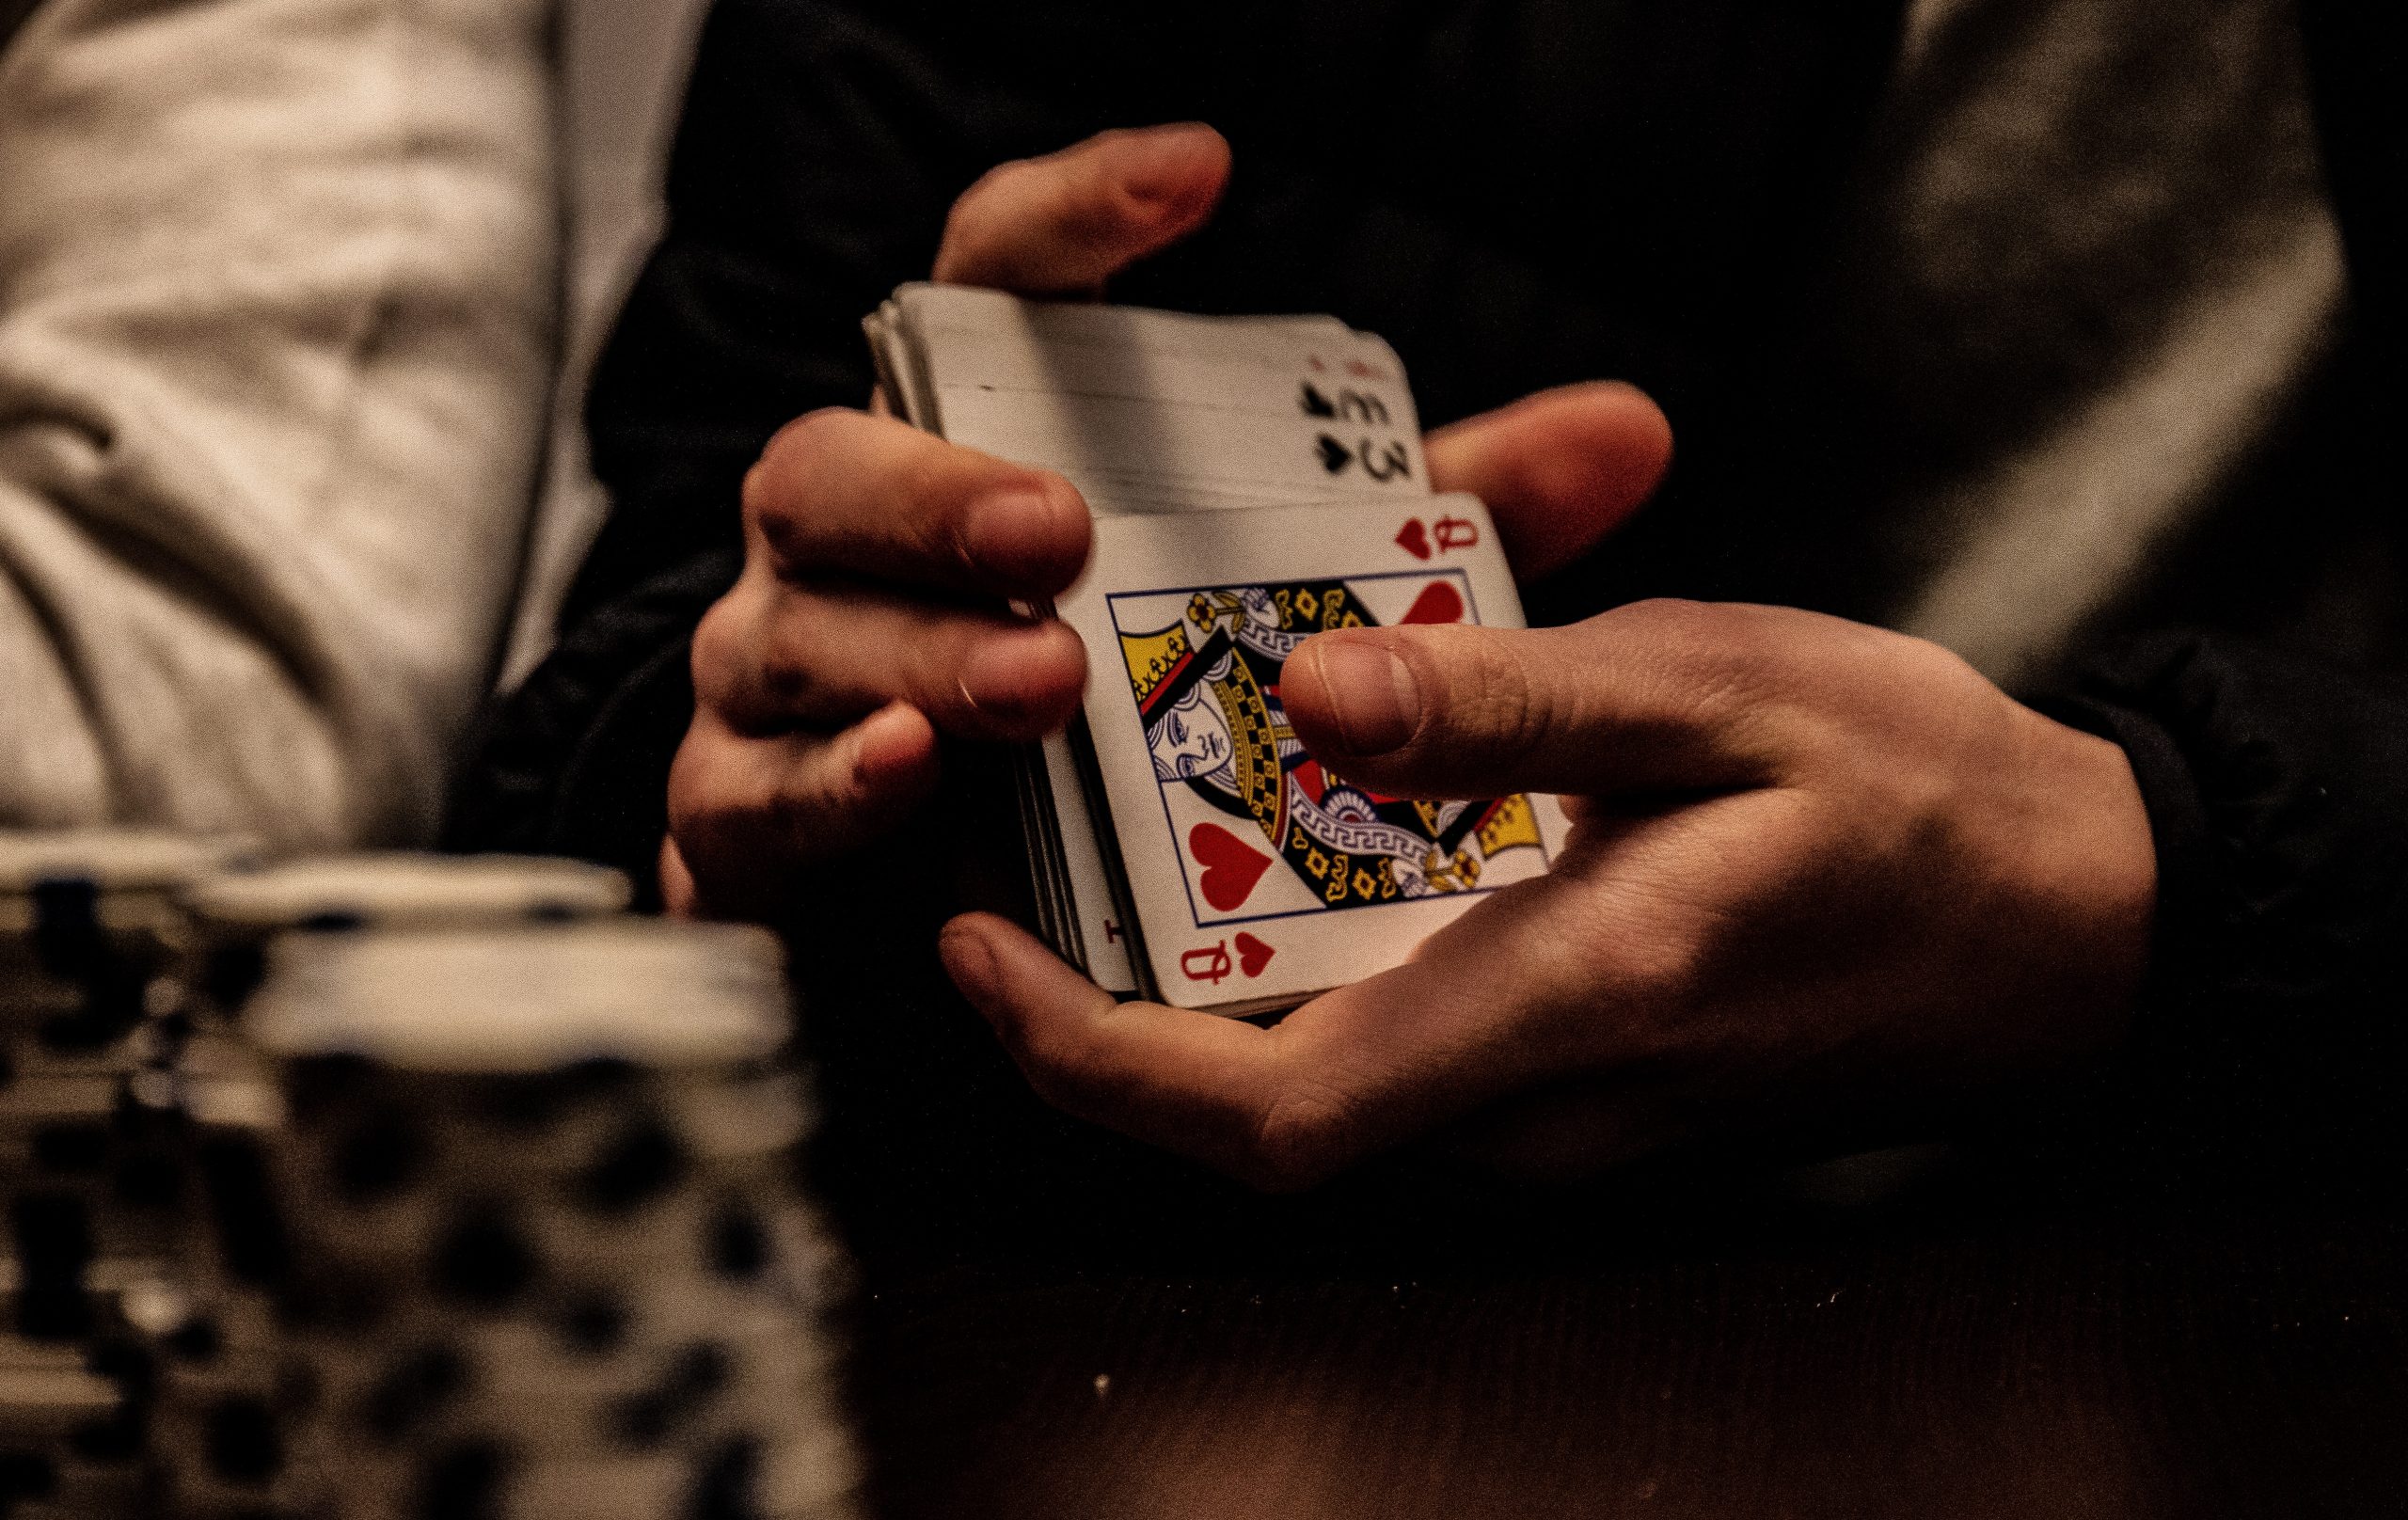 in an article about micro stakes poker, someone shuffling a deck of cards